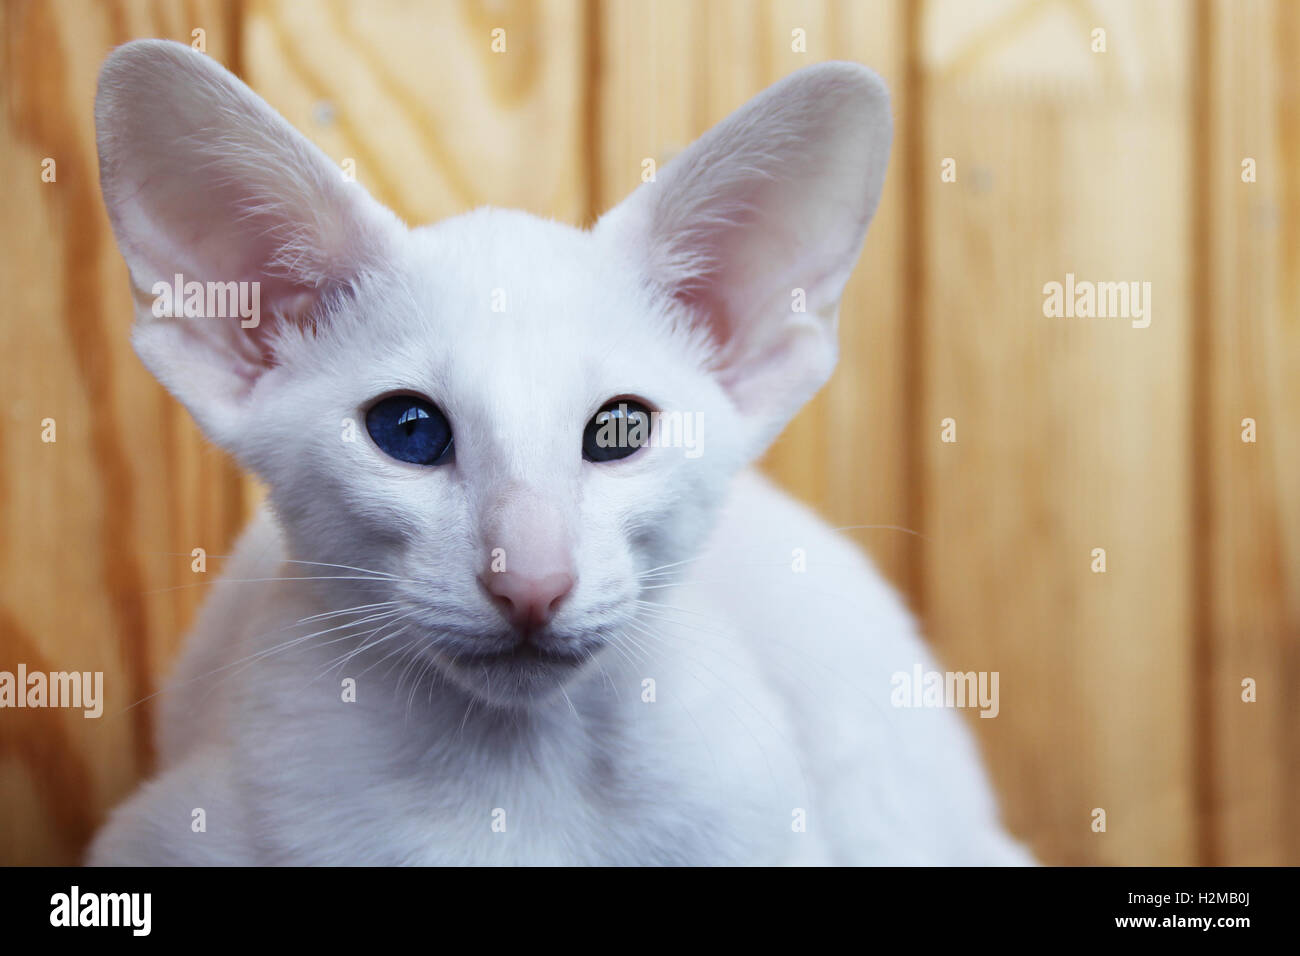 White oriental cat with eyes of different colors. Stock Photo